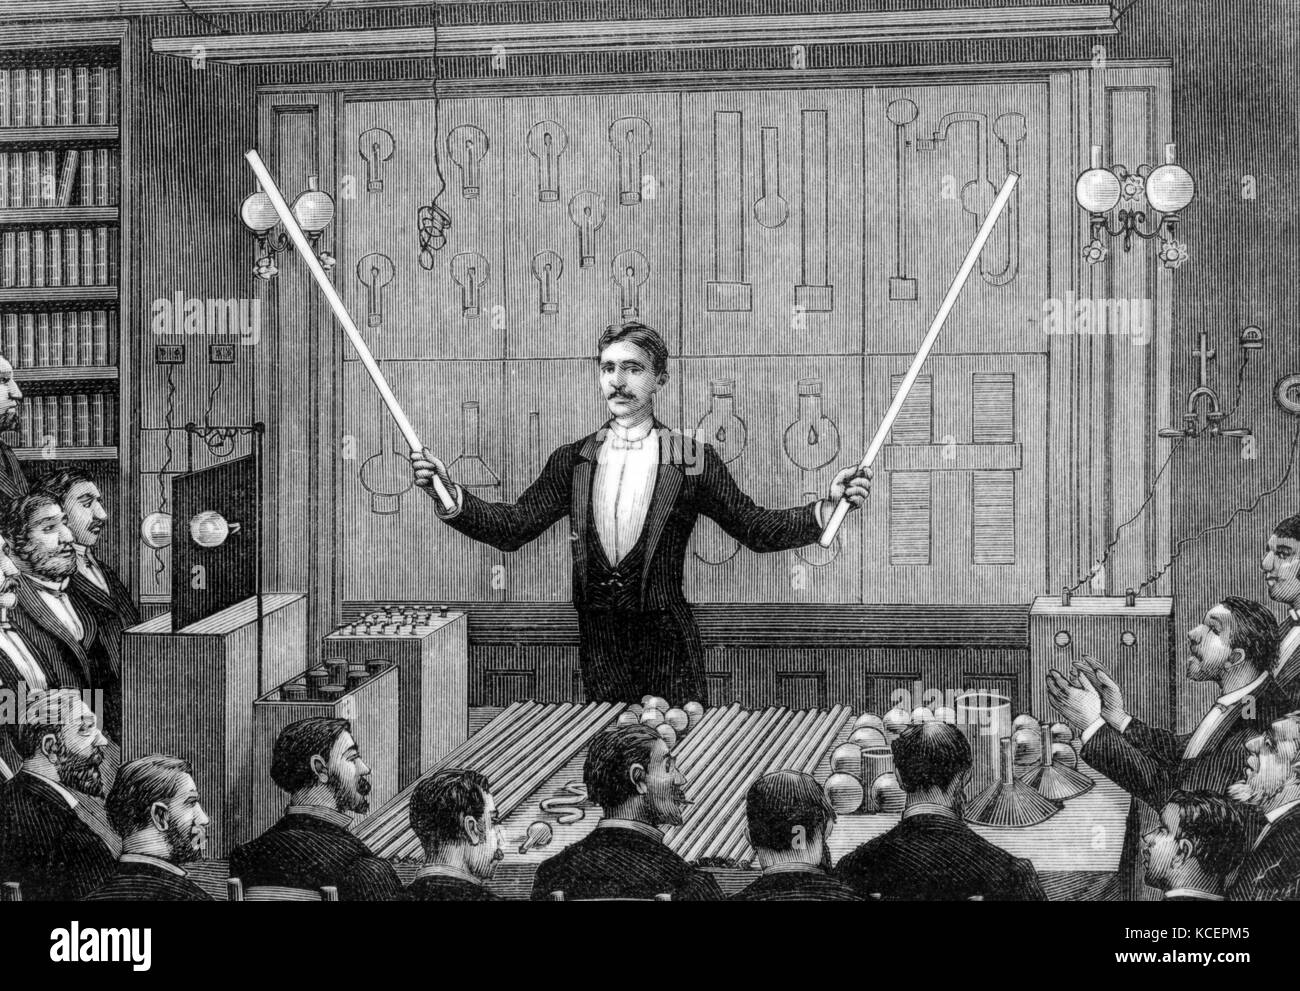 Illustration depicting Nikola Tesla (1856-1943) a Serbian-American inventor, electrical engineer, mechanical engineer, physicist, and futurist. Dated 19th Century Stock Photo